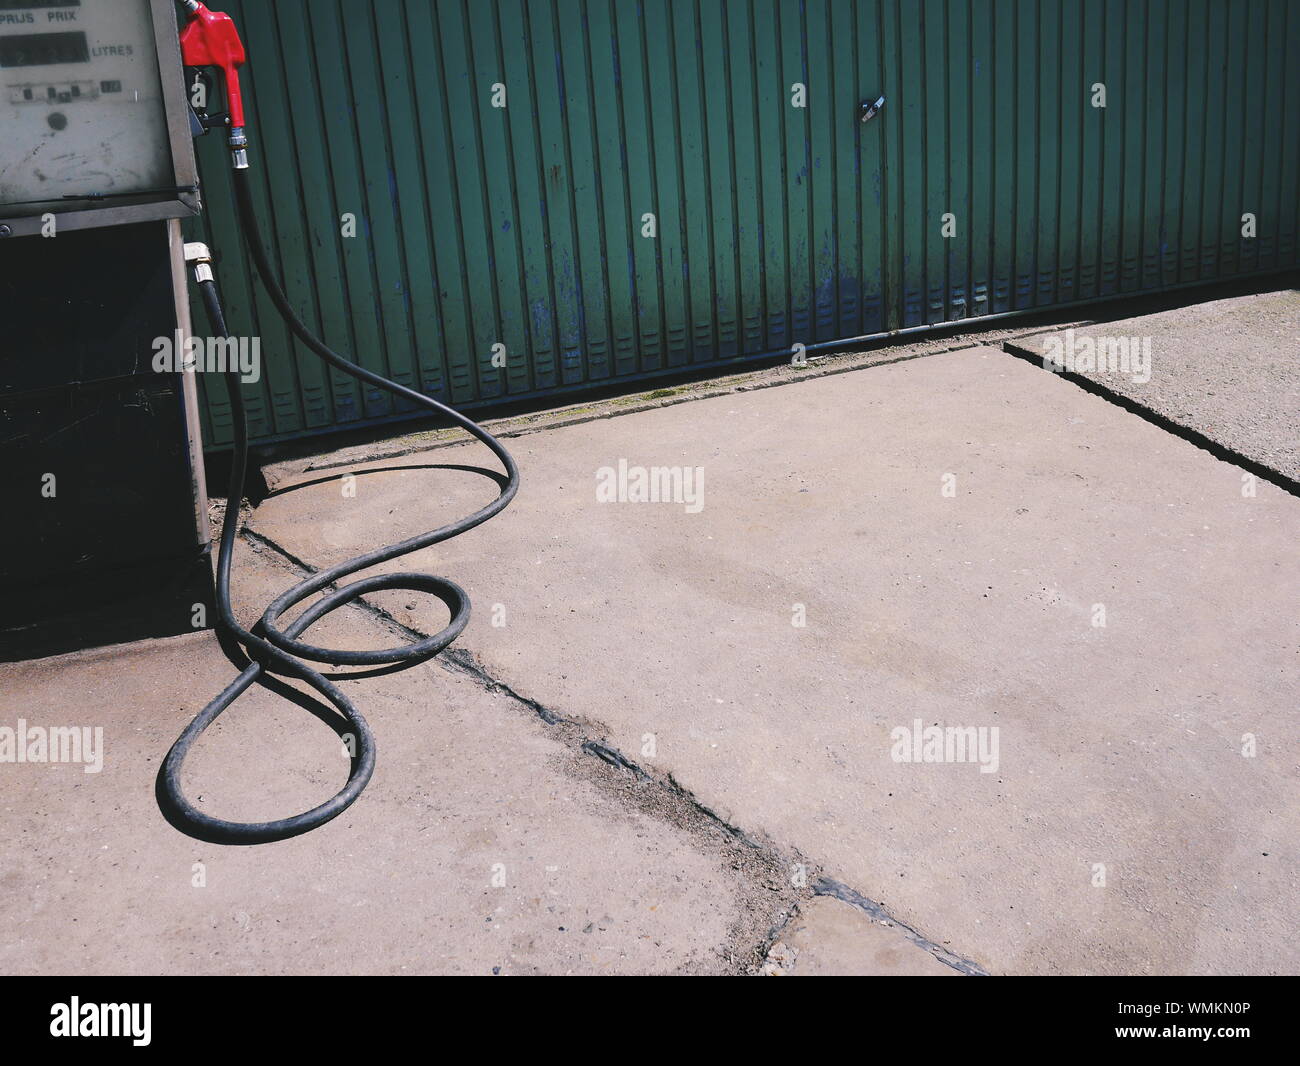 Pump By Gate At Fuel Station Stock Photo